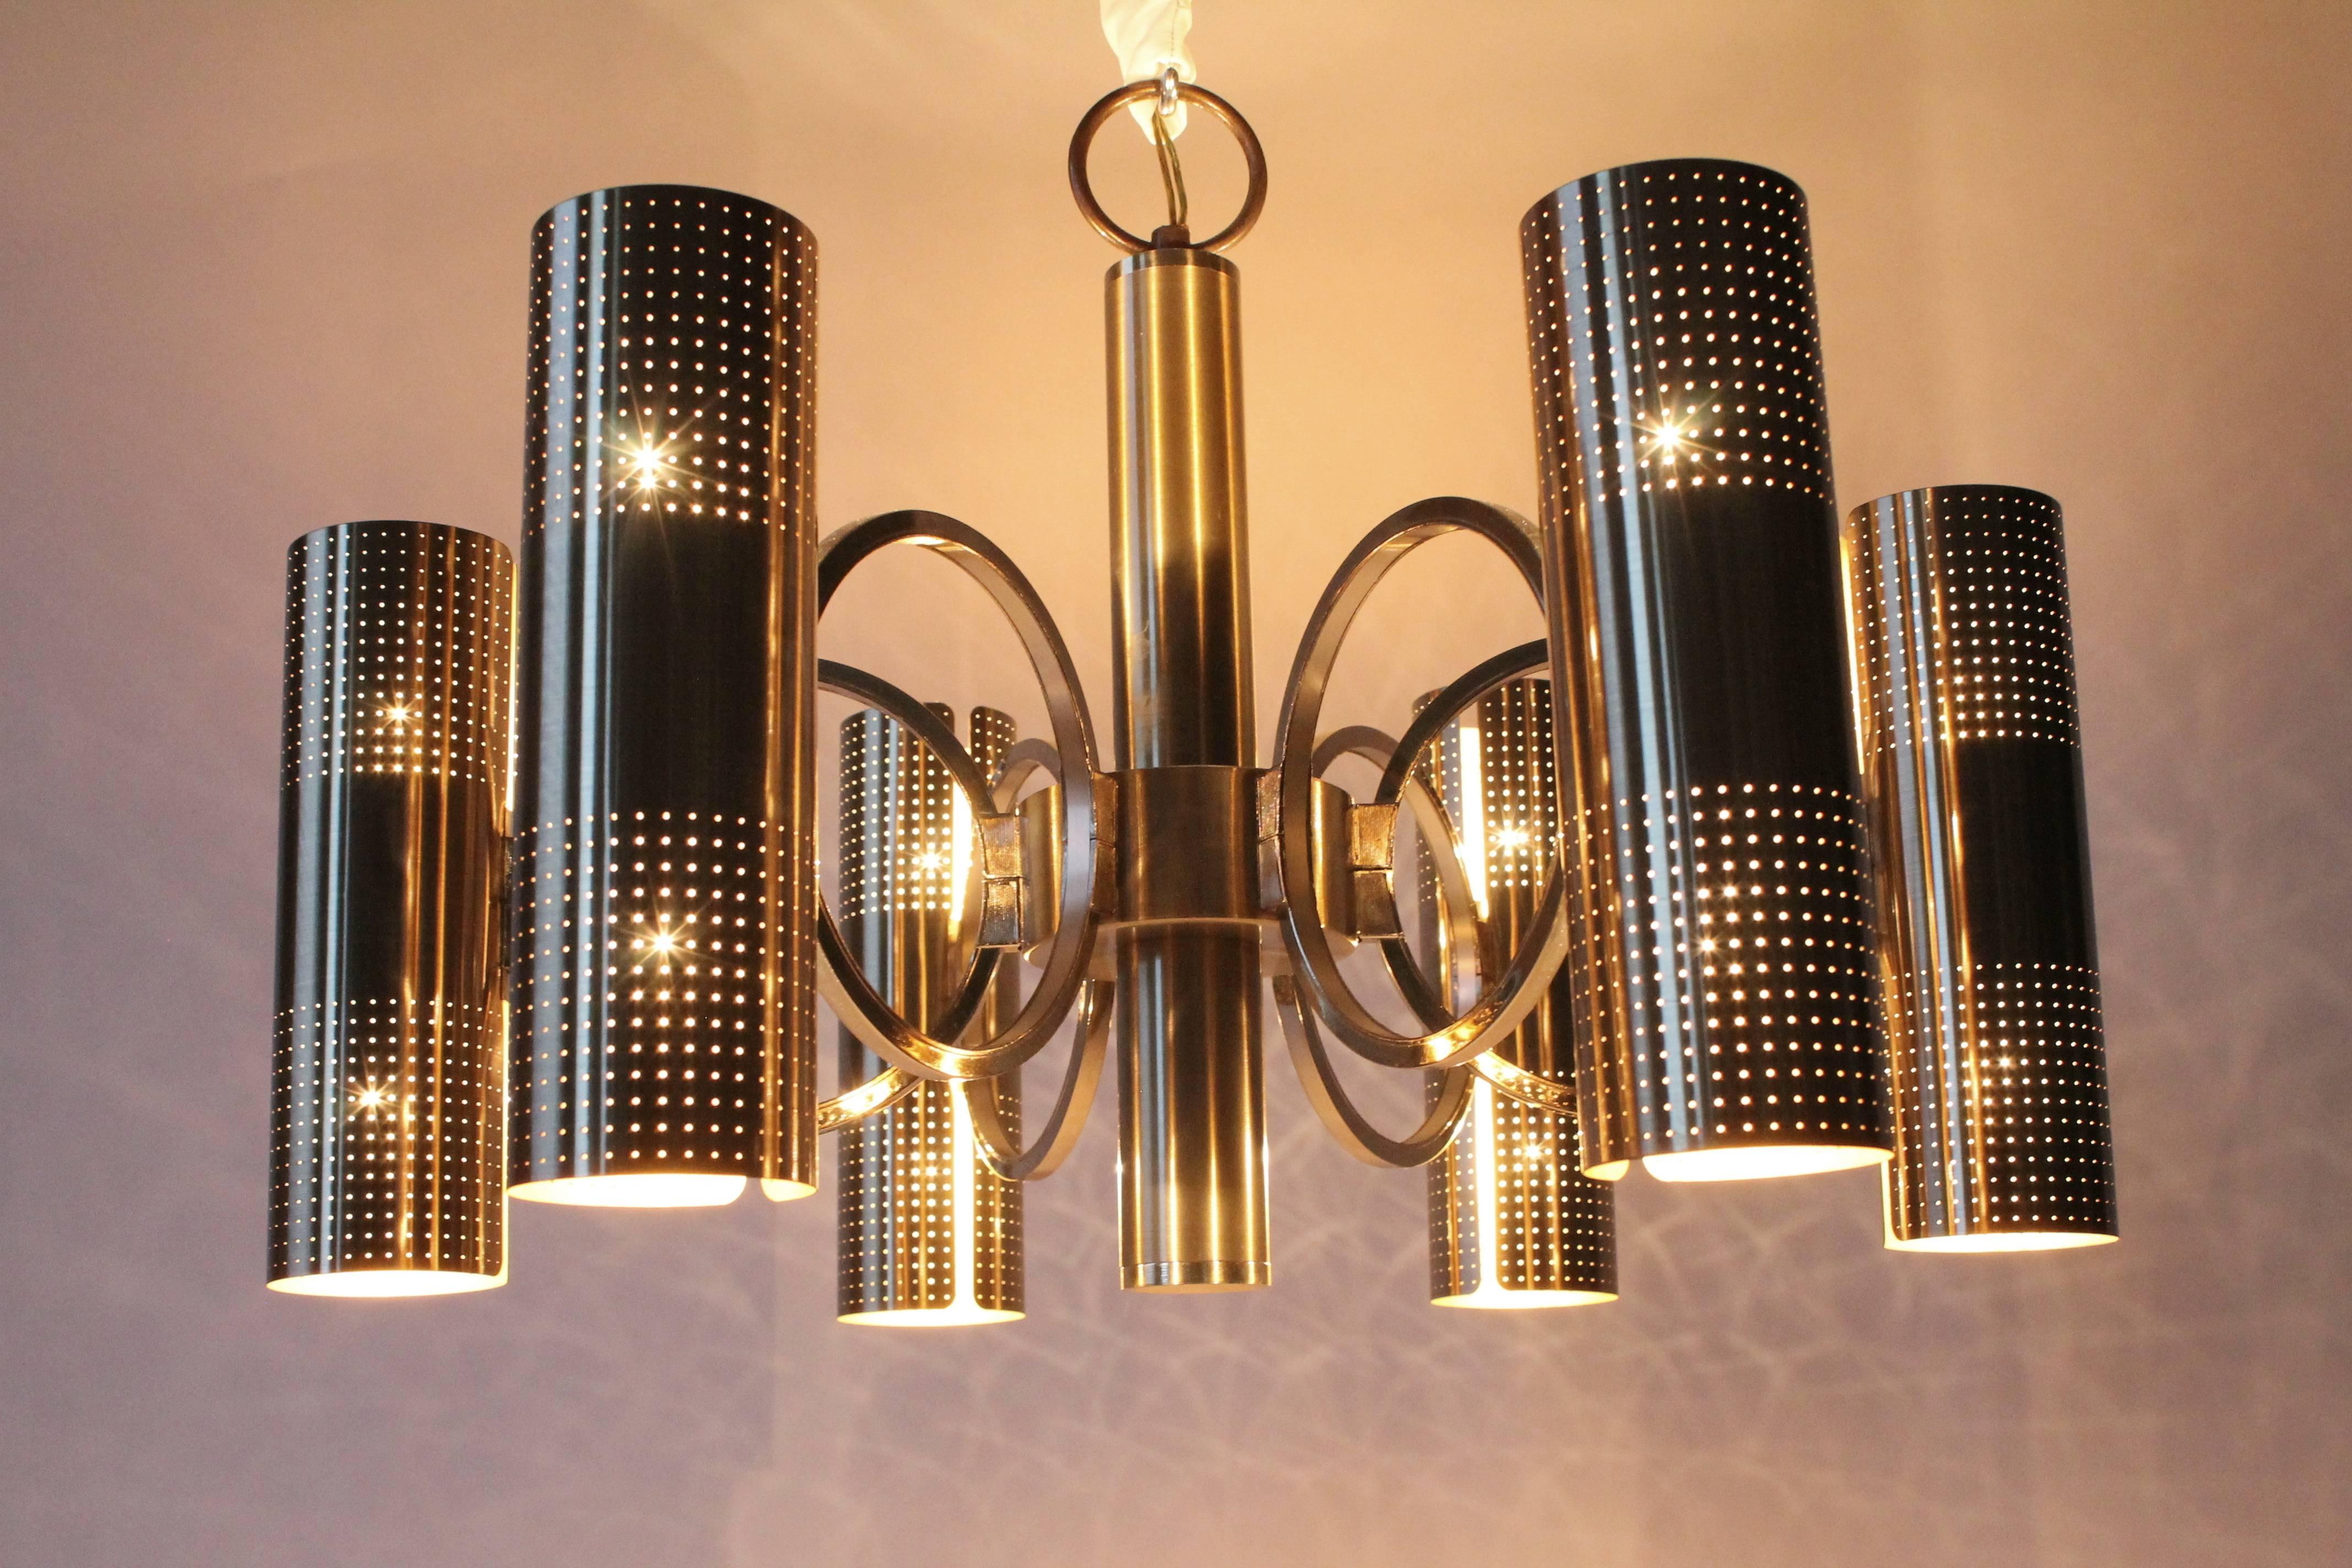 Prime quality lacquered brass with needle tips size perforated holes on shade. 

Well made, solid construction. 

Six upward and six downward firing light bulbs with regular E26 size socket.

Measure 22 inches wide by 16 inches high.

Actual